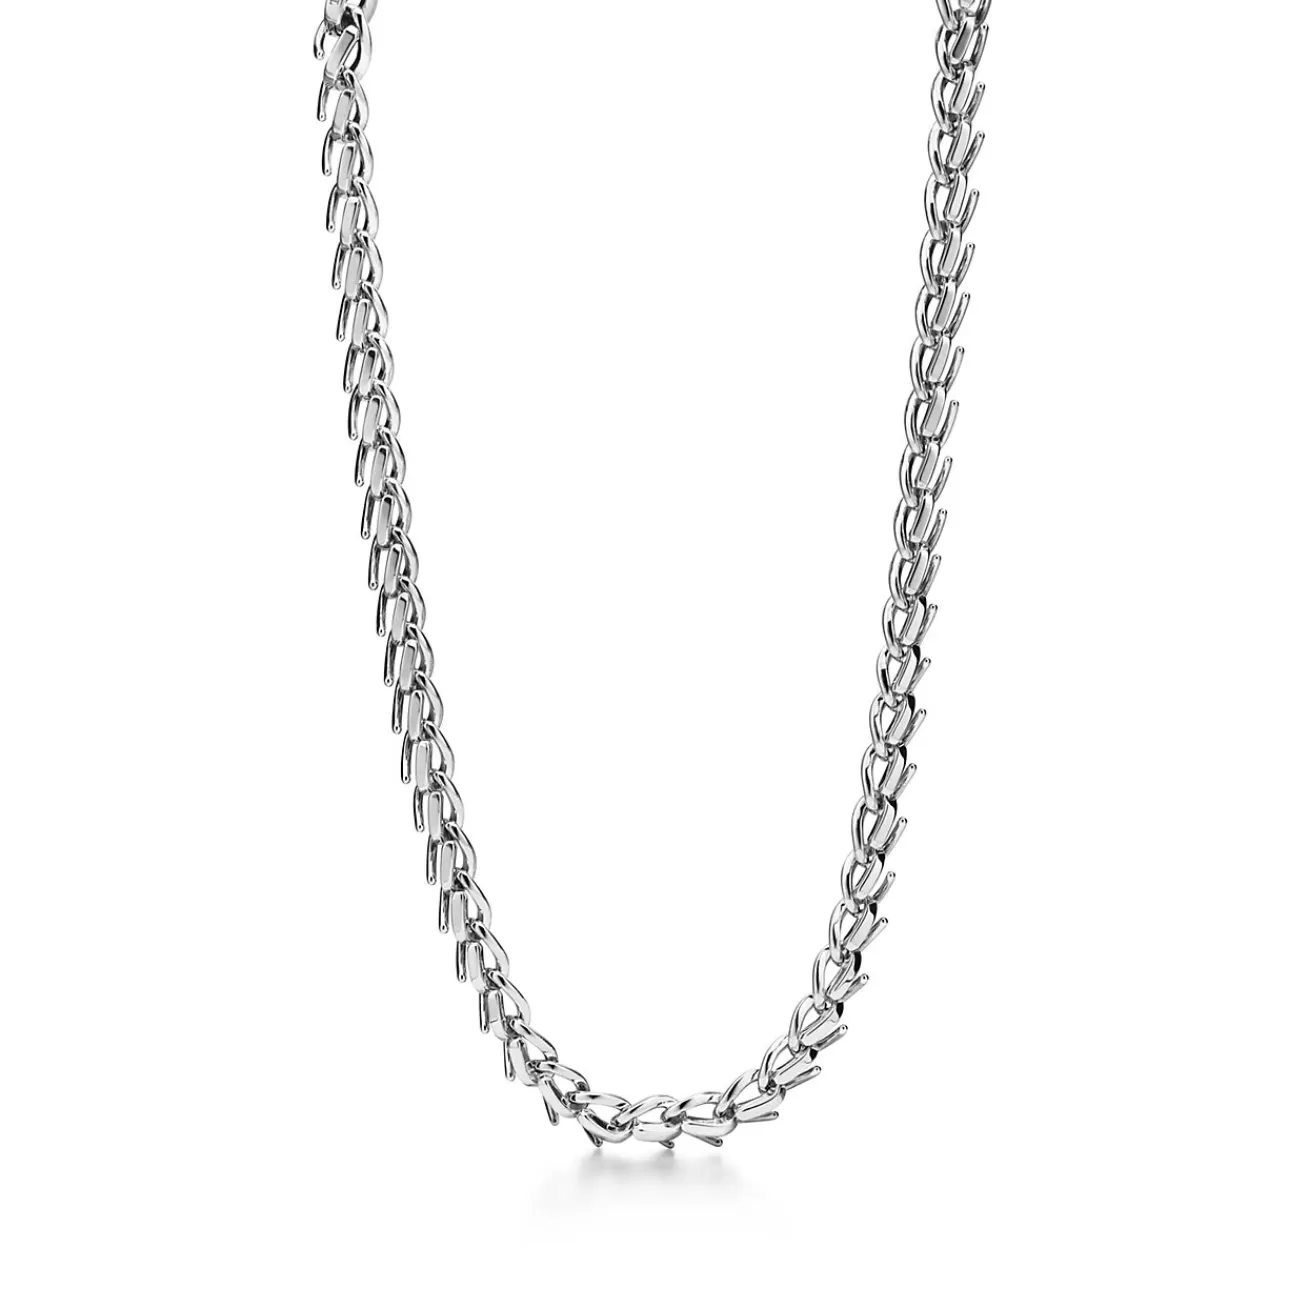 Tiffany & Co. Tiffany Forge Medium Link Necklace in High- polished Sterling Silver | ^ Necklaces & Pendants | Men's Jewelry